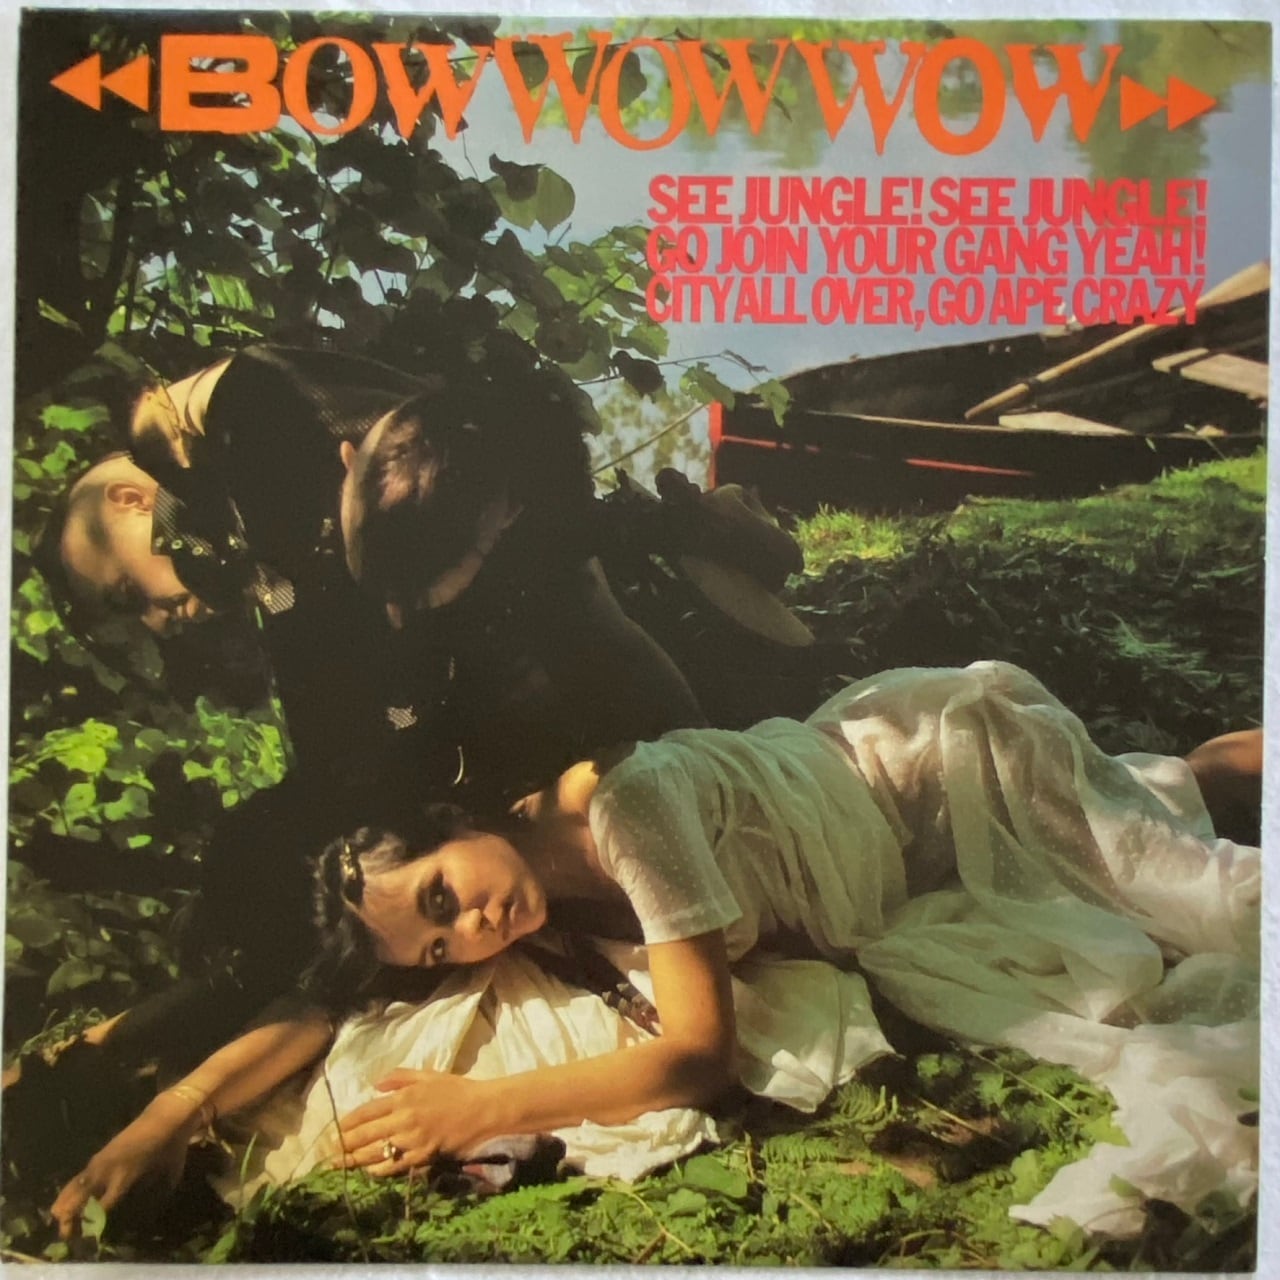 【LP】Bow Wow Wow – See Jungle! See Jungle! Go Join Your Gang Yeah! City All Over, Go Ape Crazy